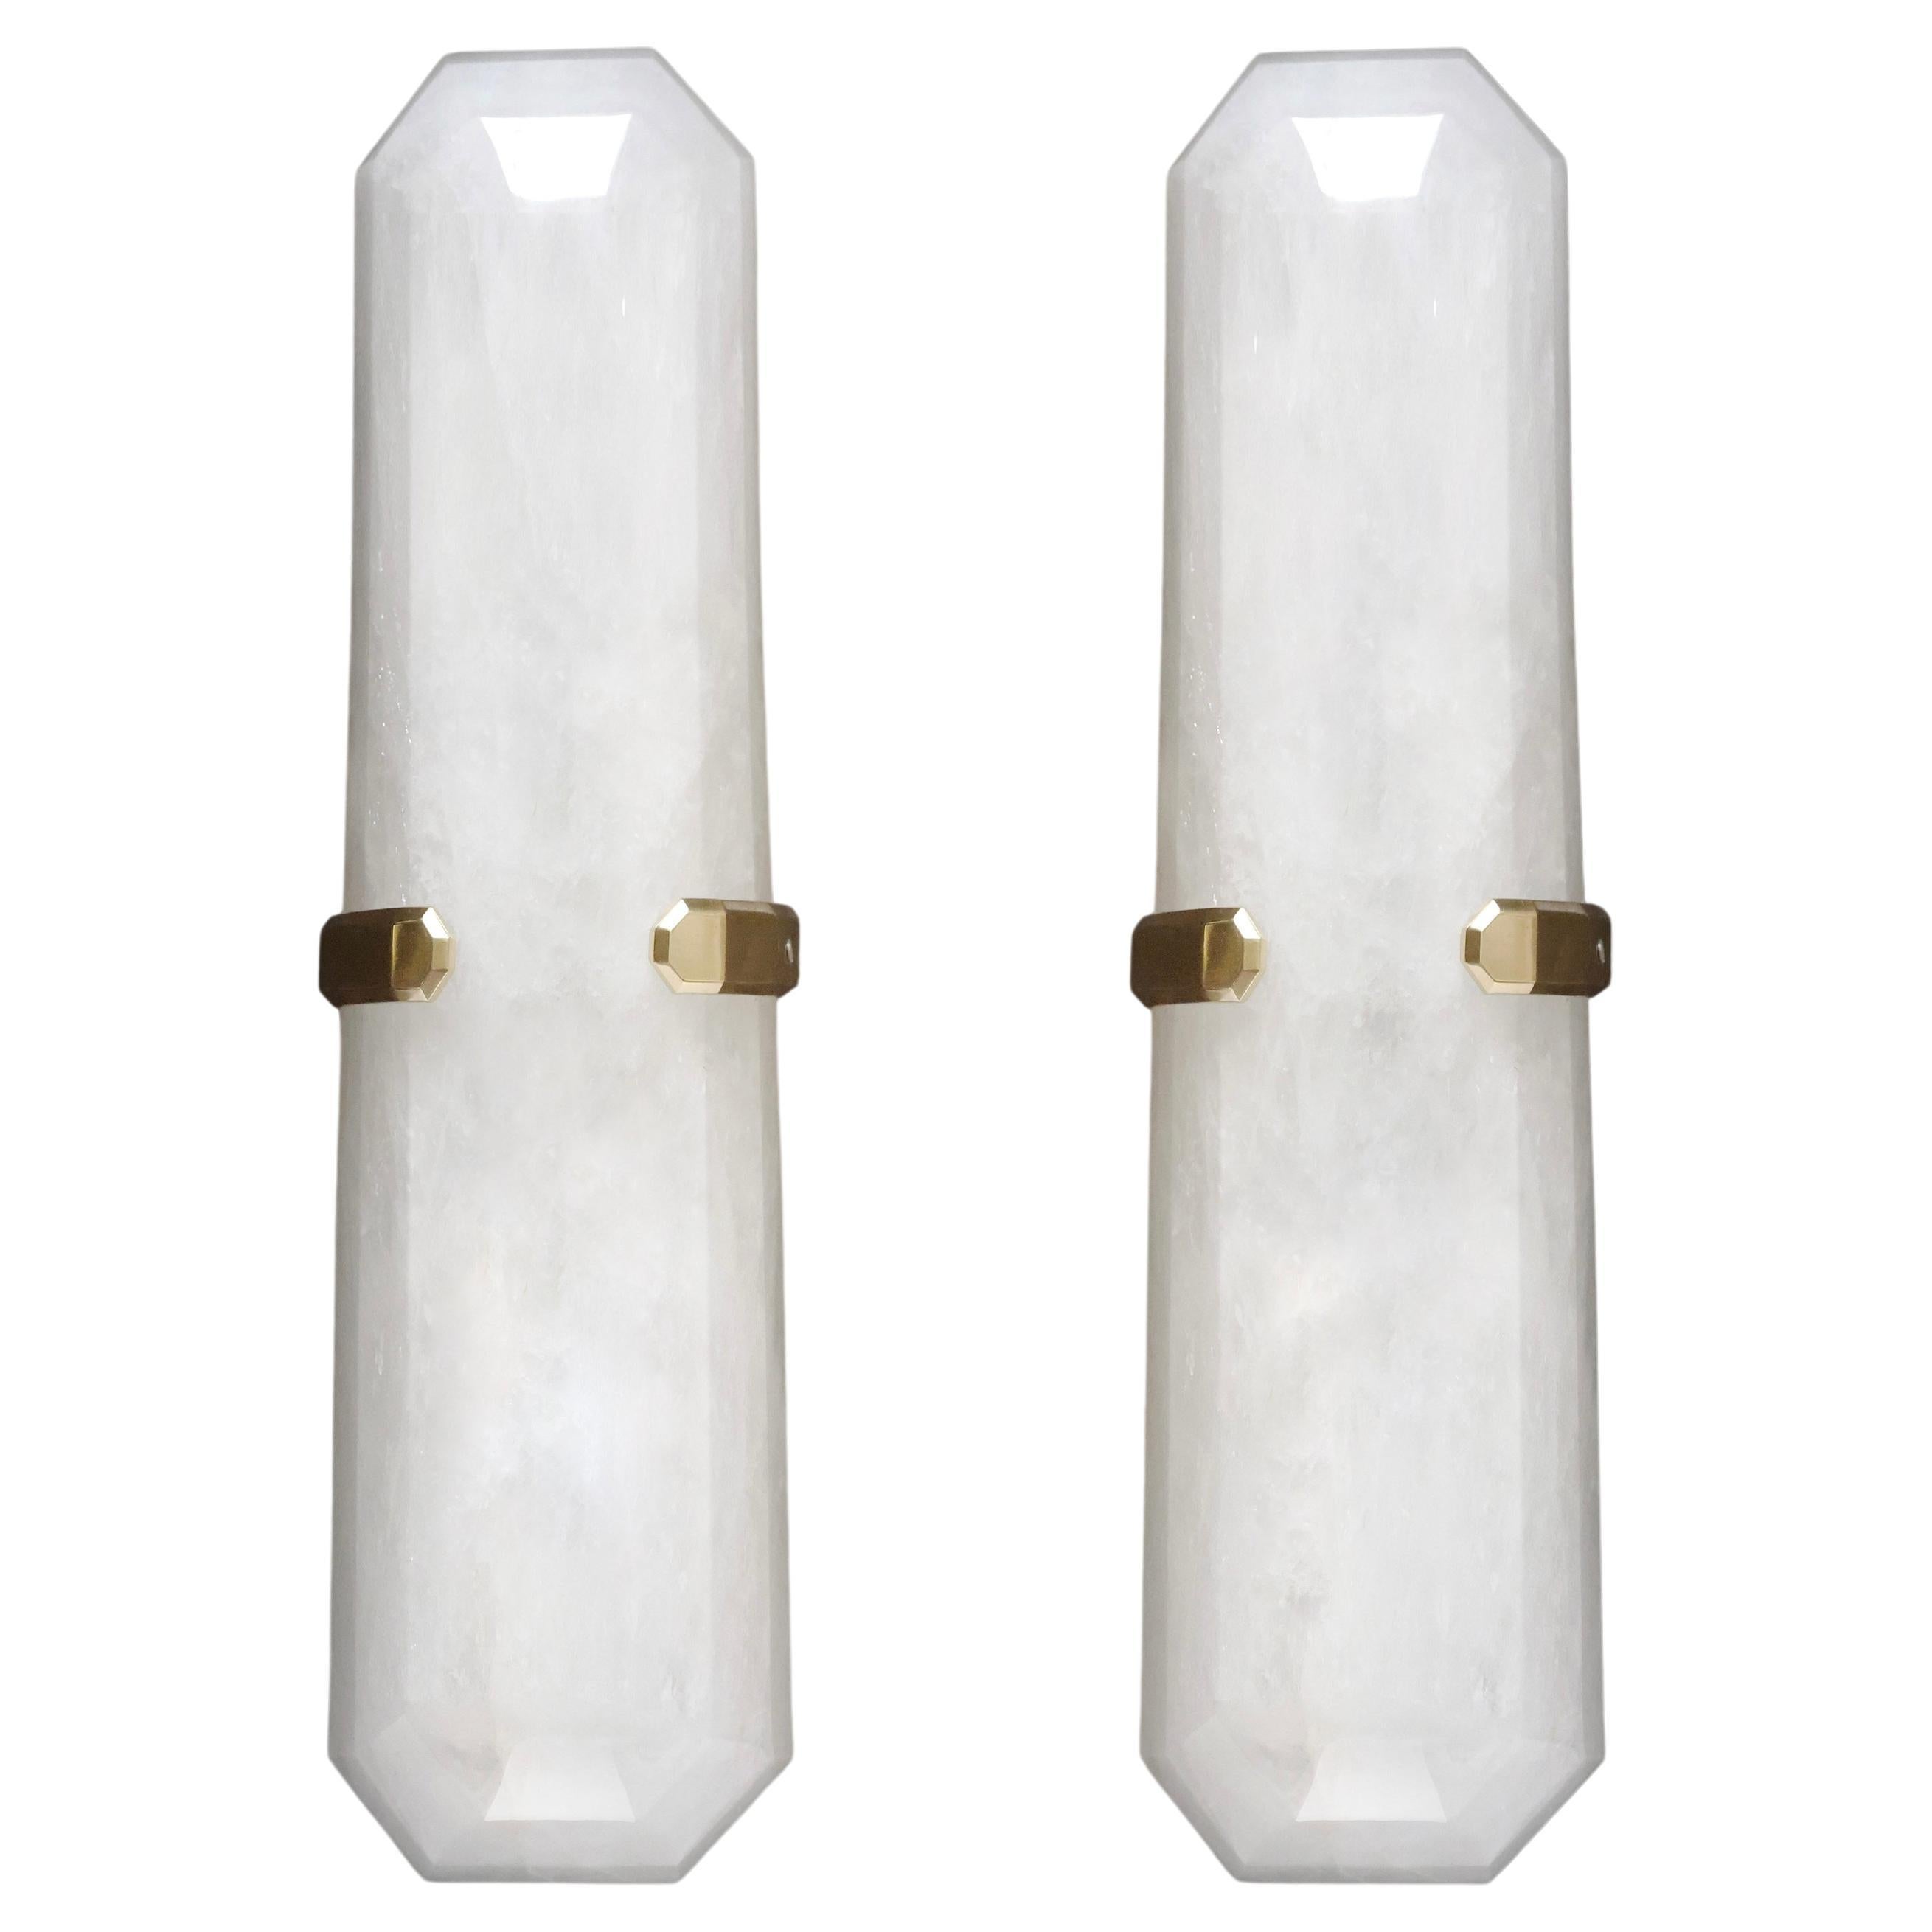 MWR17 Rock Crystal Sconces By Phoenix For Sale